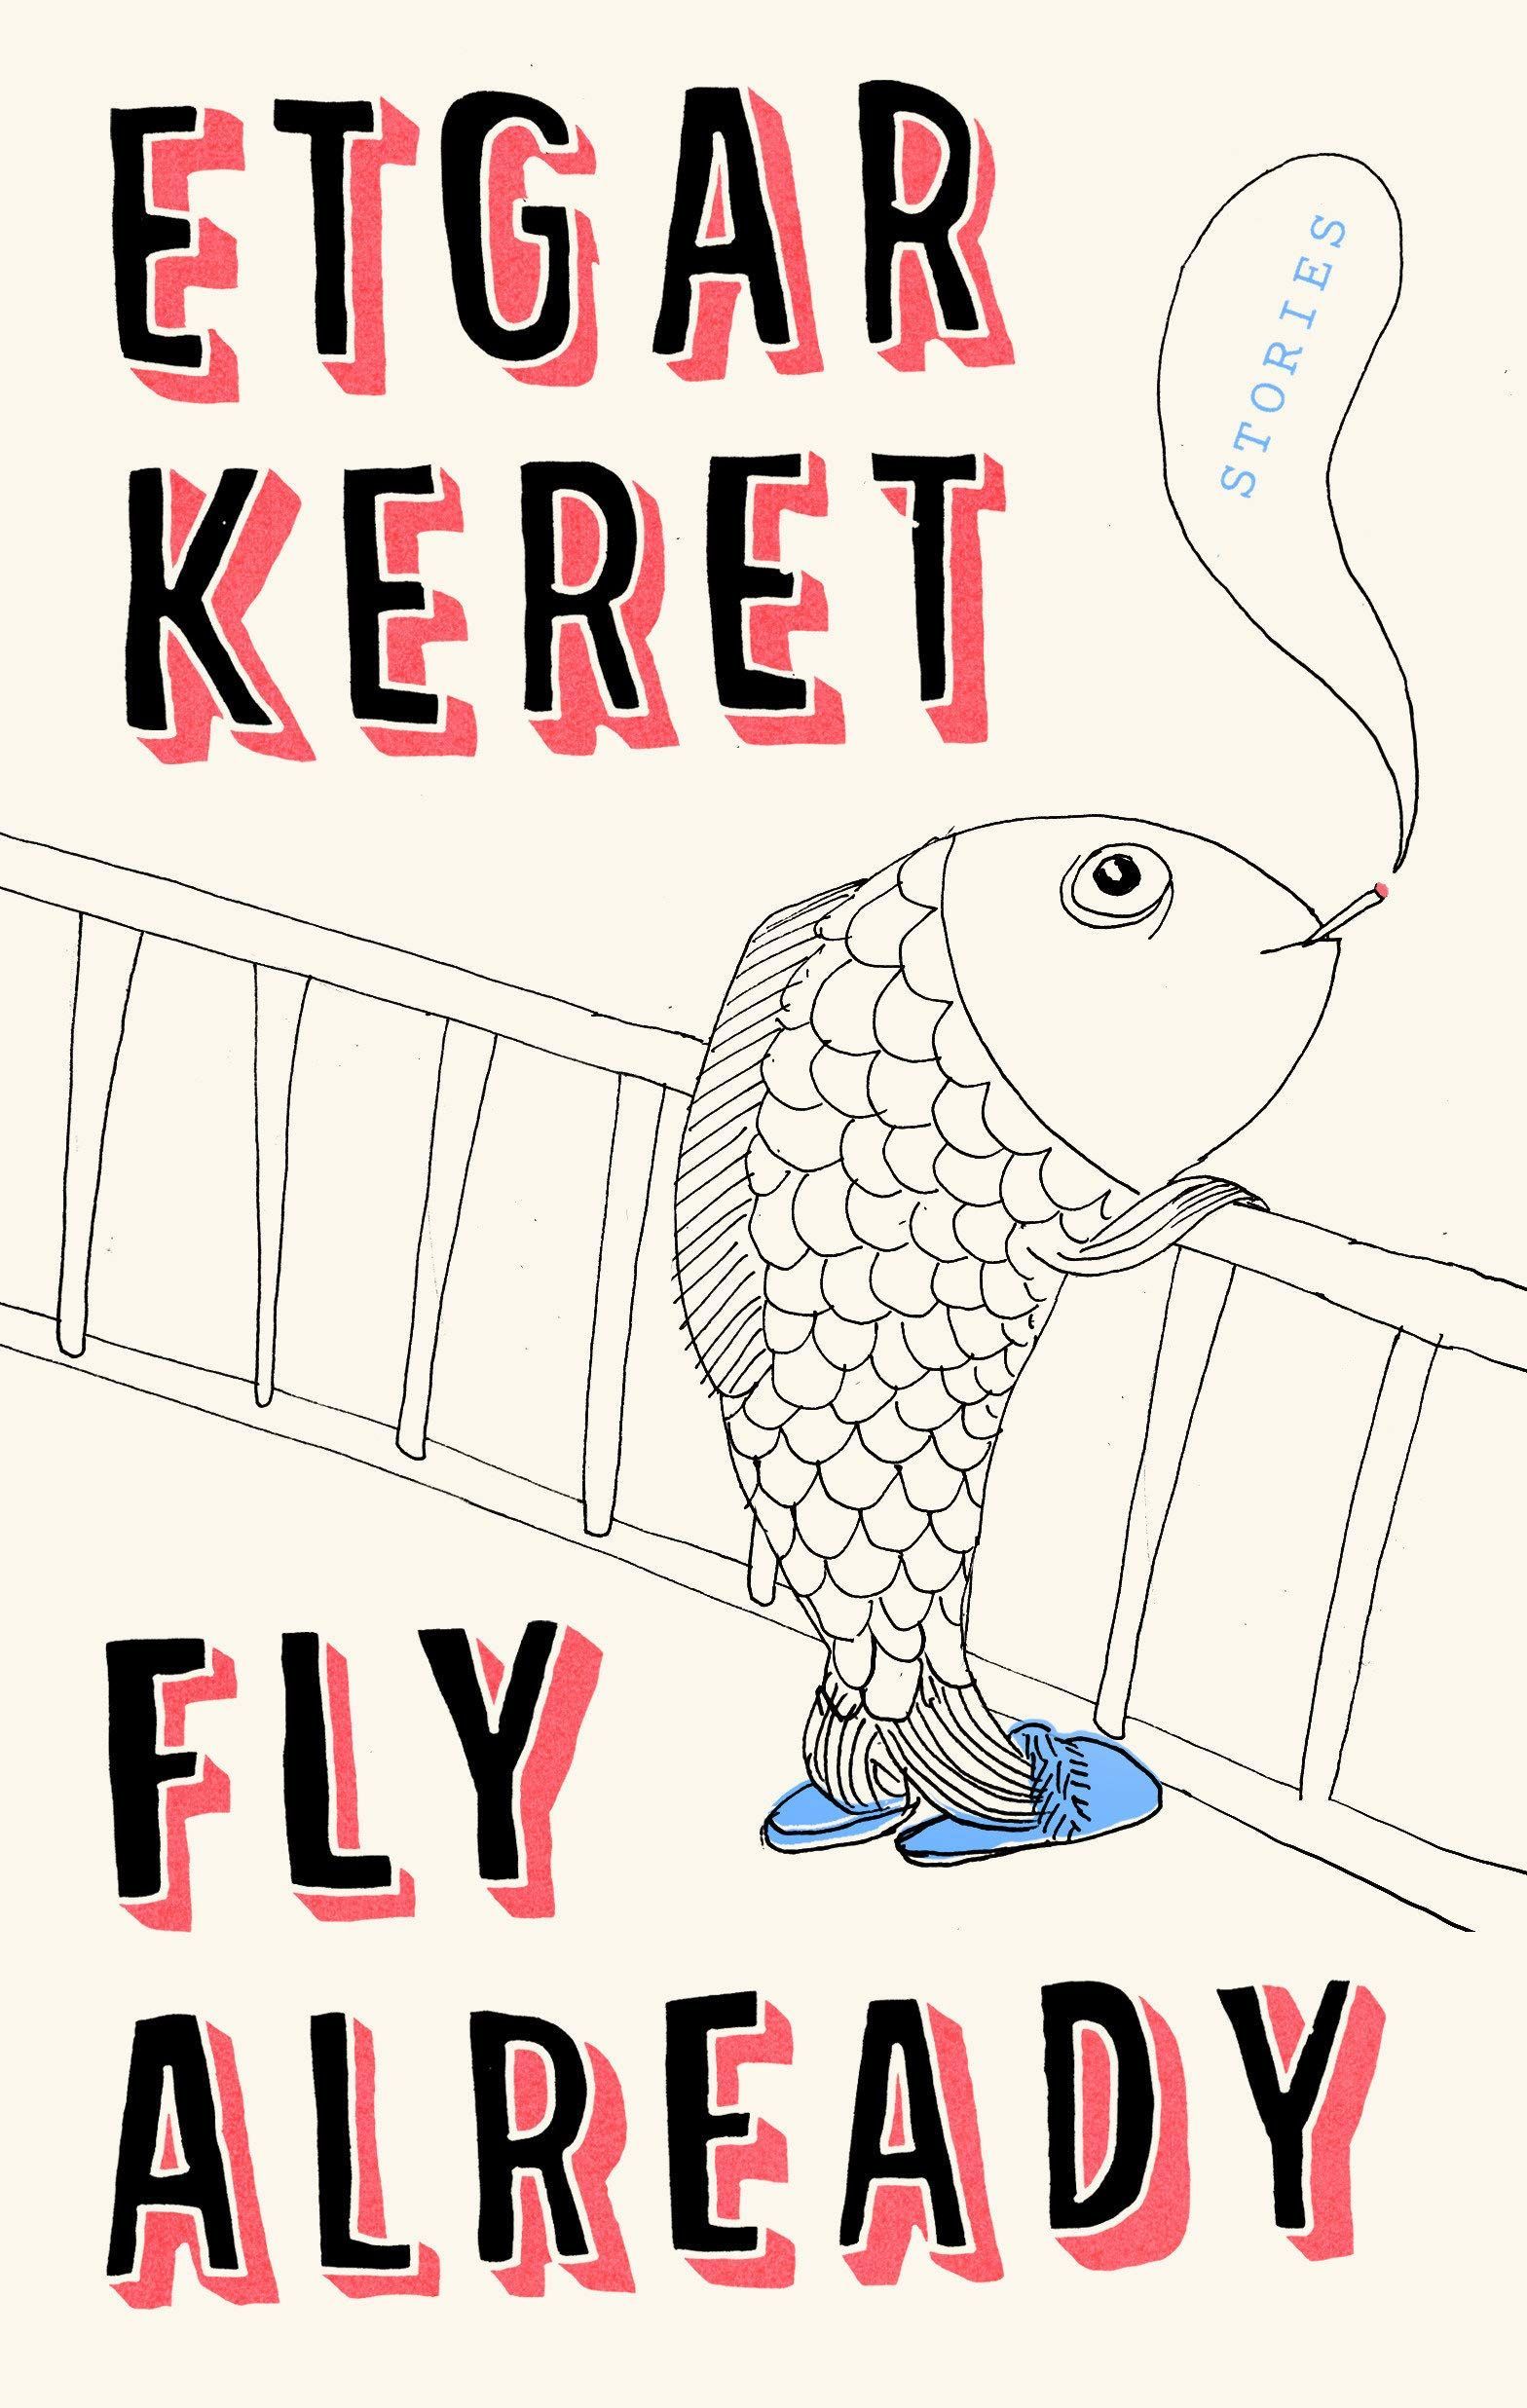 Small Comforts and Brief Glimpses of Beauty: On Etgar Keret’s “Fly Already”